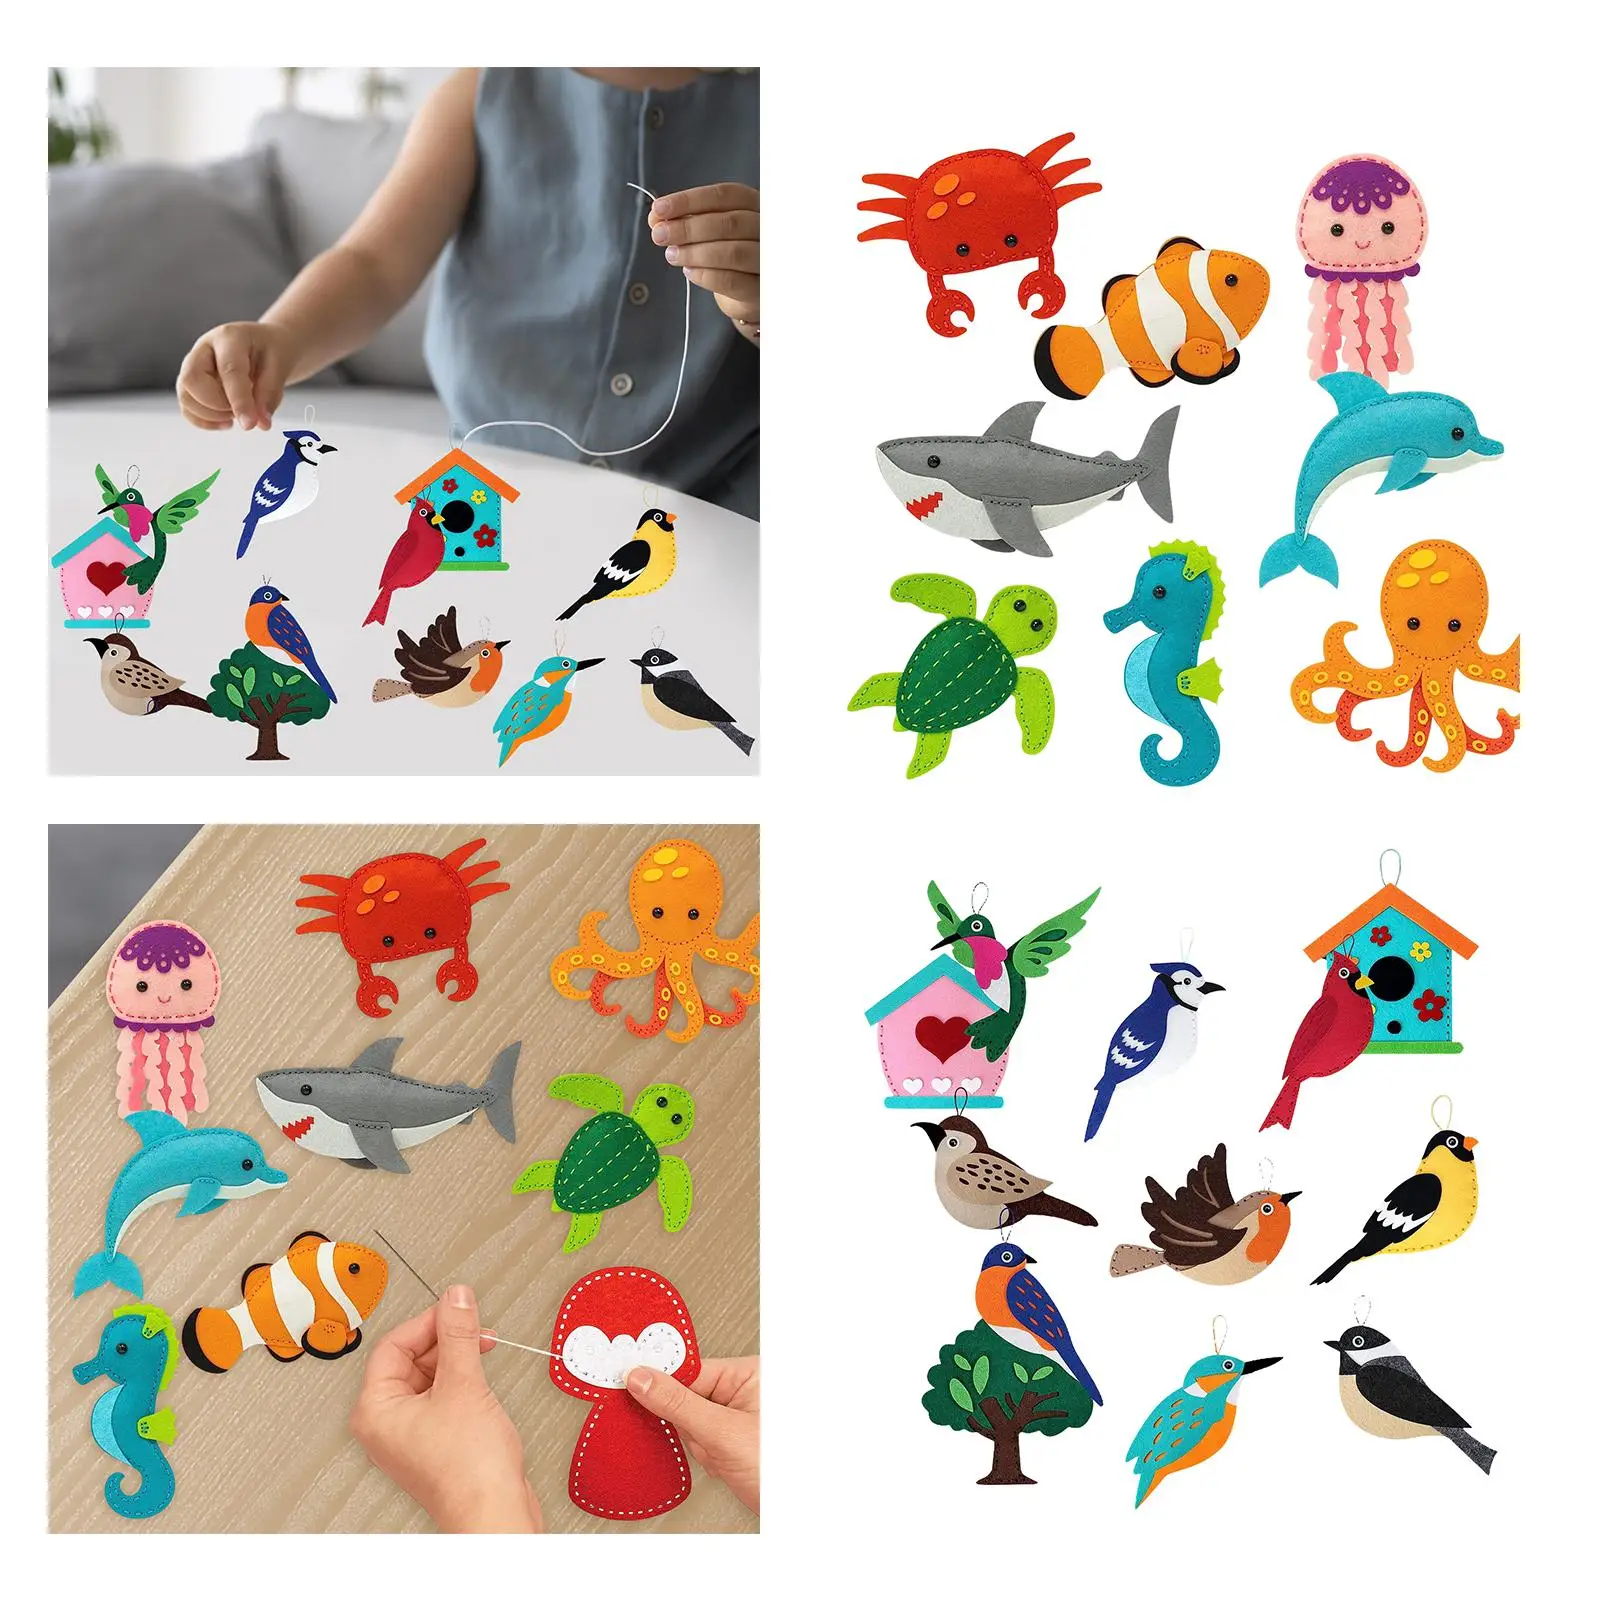 Felt Sewing Kits Fish and Birds DIY Crafting and Sewing Set Animals Sewing for kids Boys Children Toddler